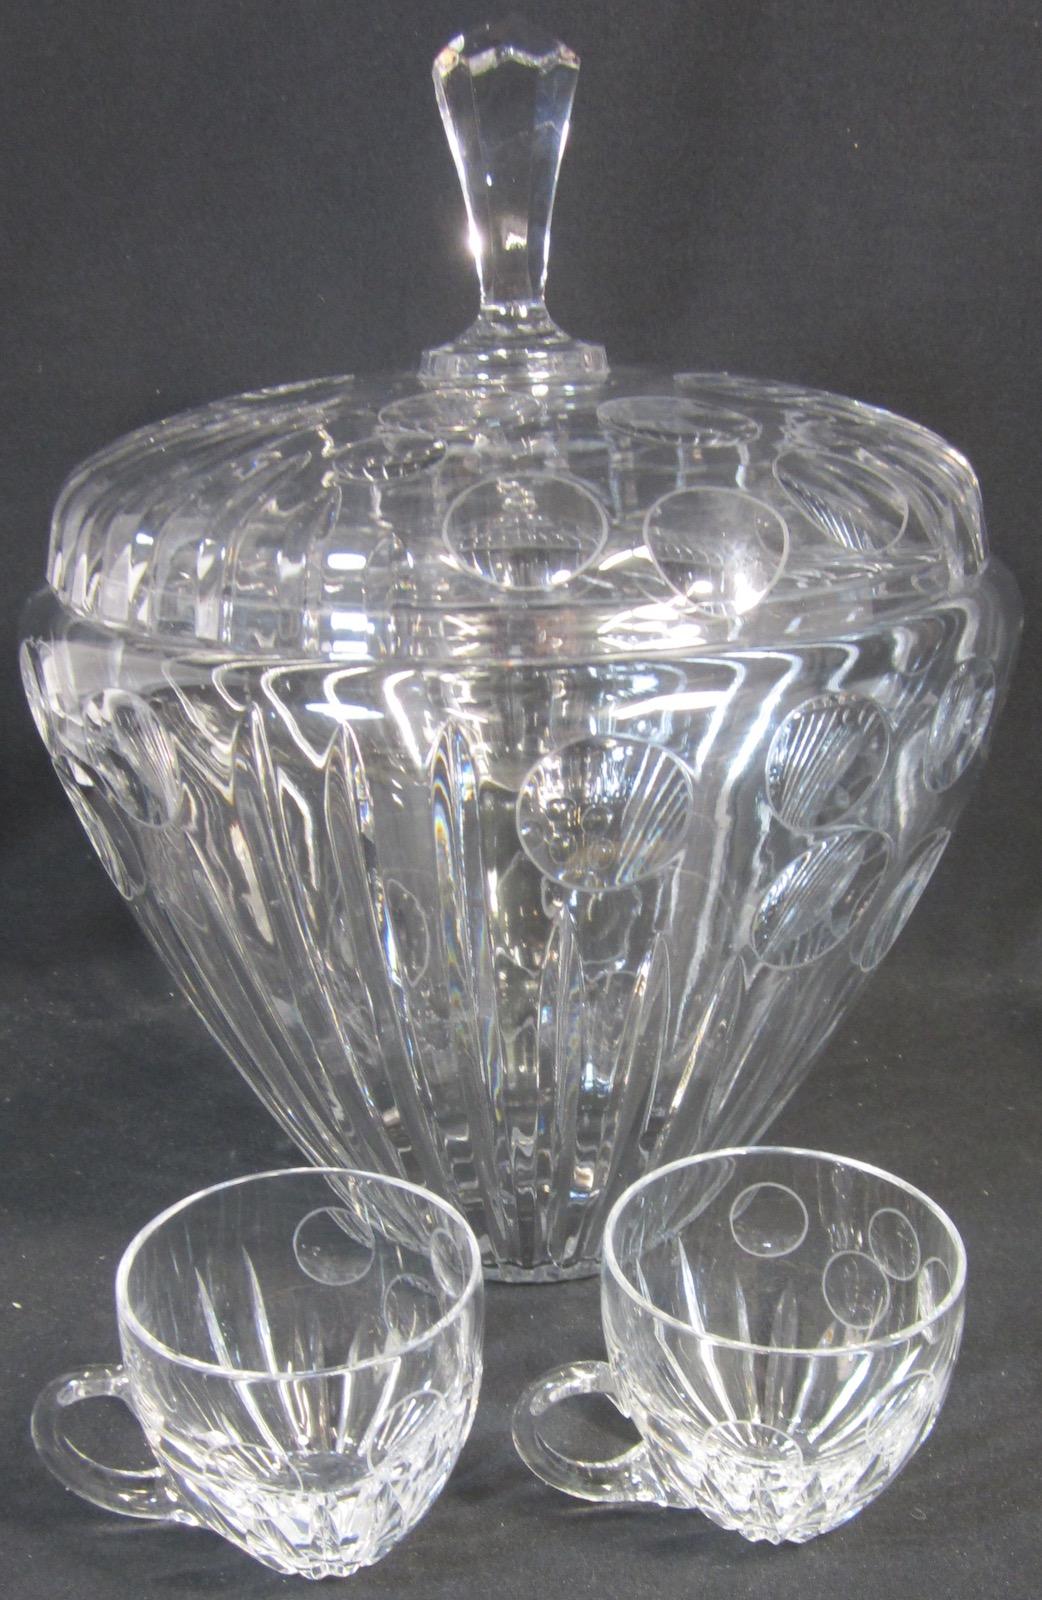 Bohemian crystal punch bowl and 10 cups with handles,
bowl 27 x 34 cm high, cups 8 x 8cm high.
Our eclectic stock crosses cultures, continents, styles and famous names.